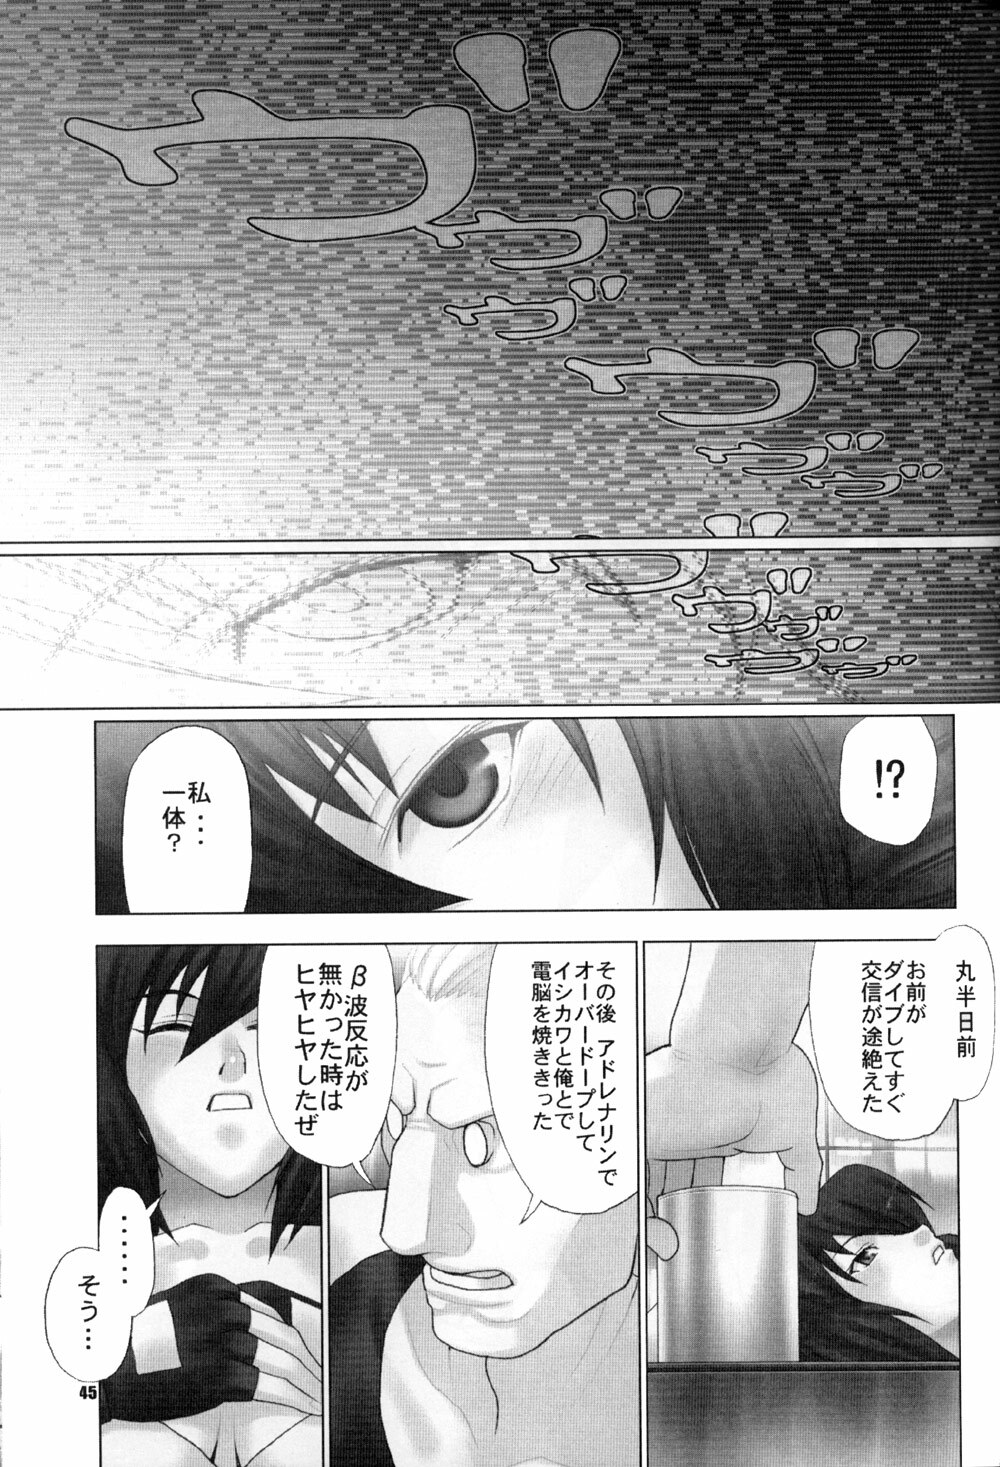 (C66) [Runners High (Chiba Toshirou)] CELLULOID - ACME (Ghost in the Shell) page 45 full